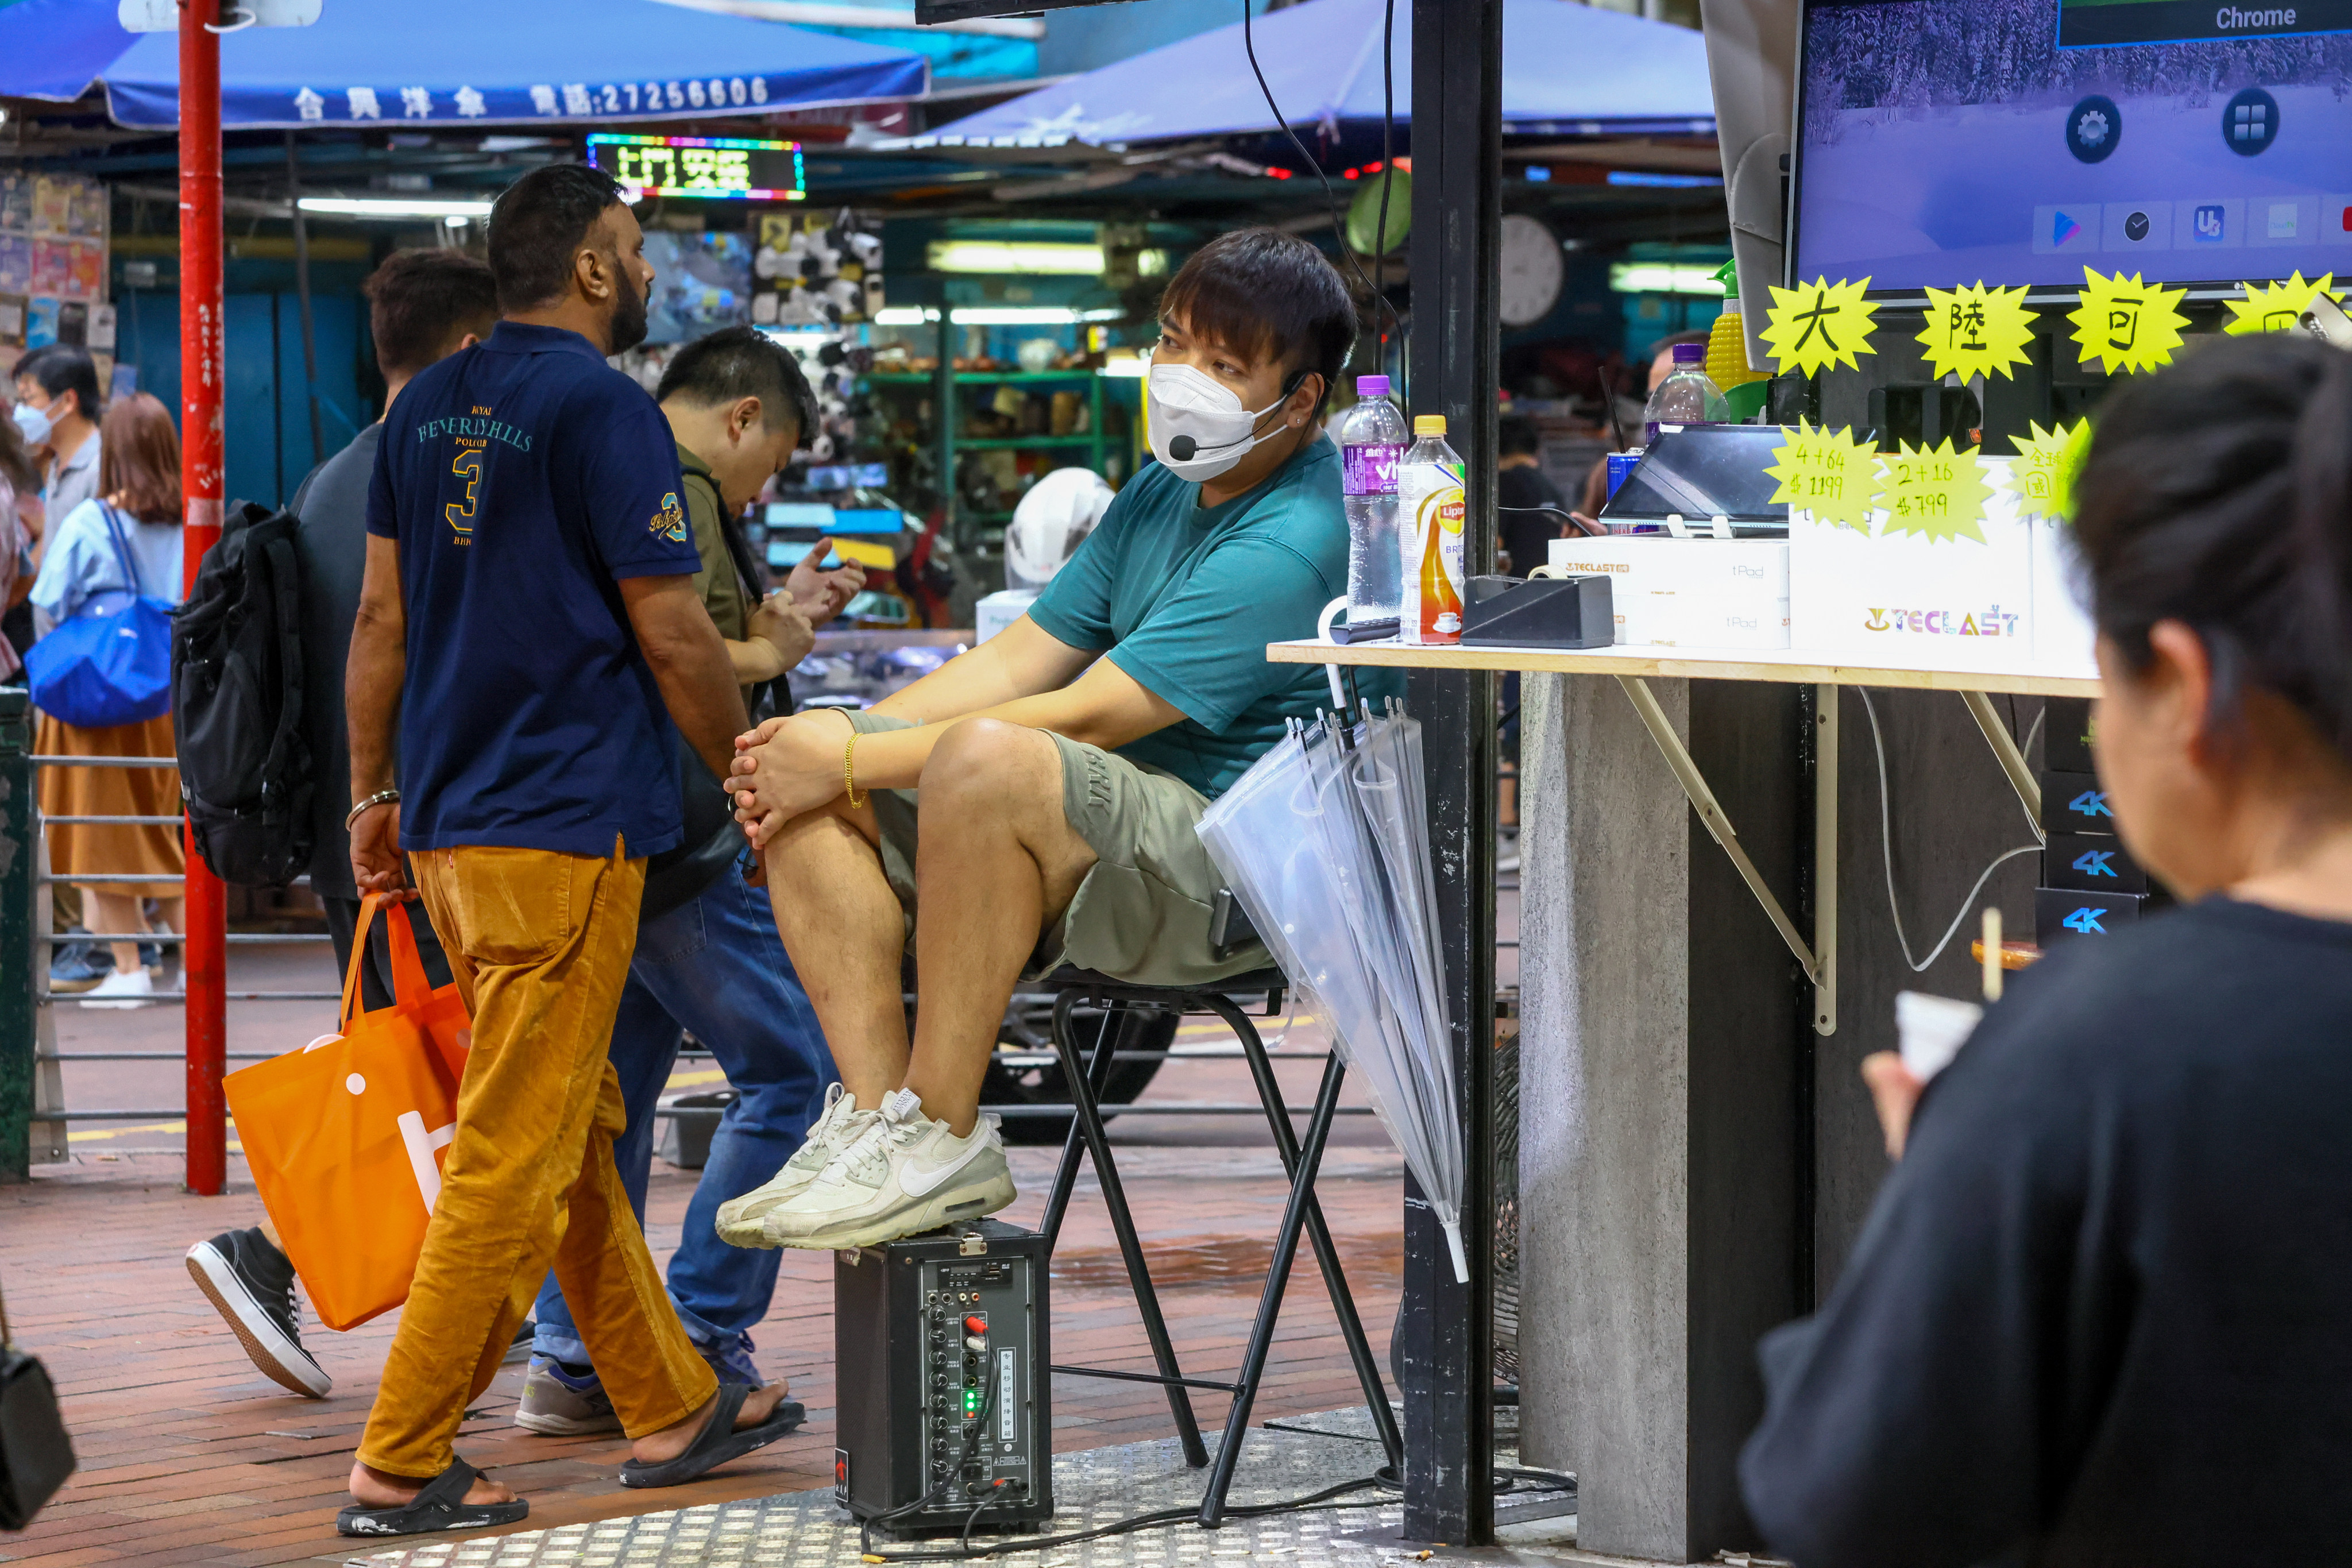 Street vendors use loudspeakers to attract customers in Sham Shui Po. Photo: Dickson Lee